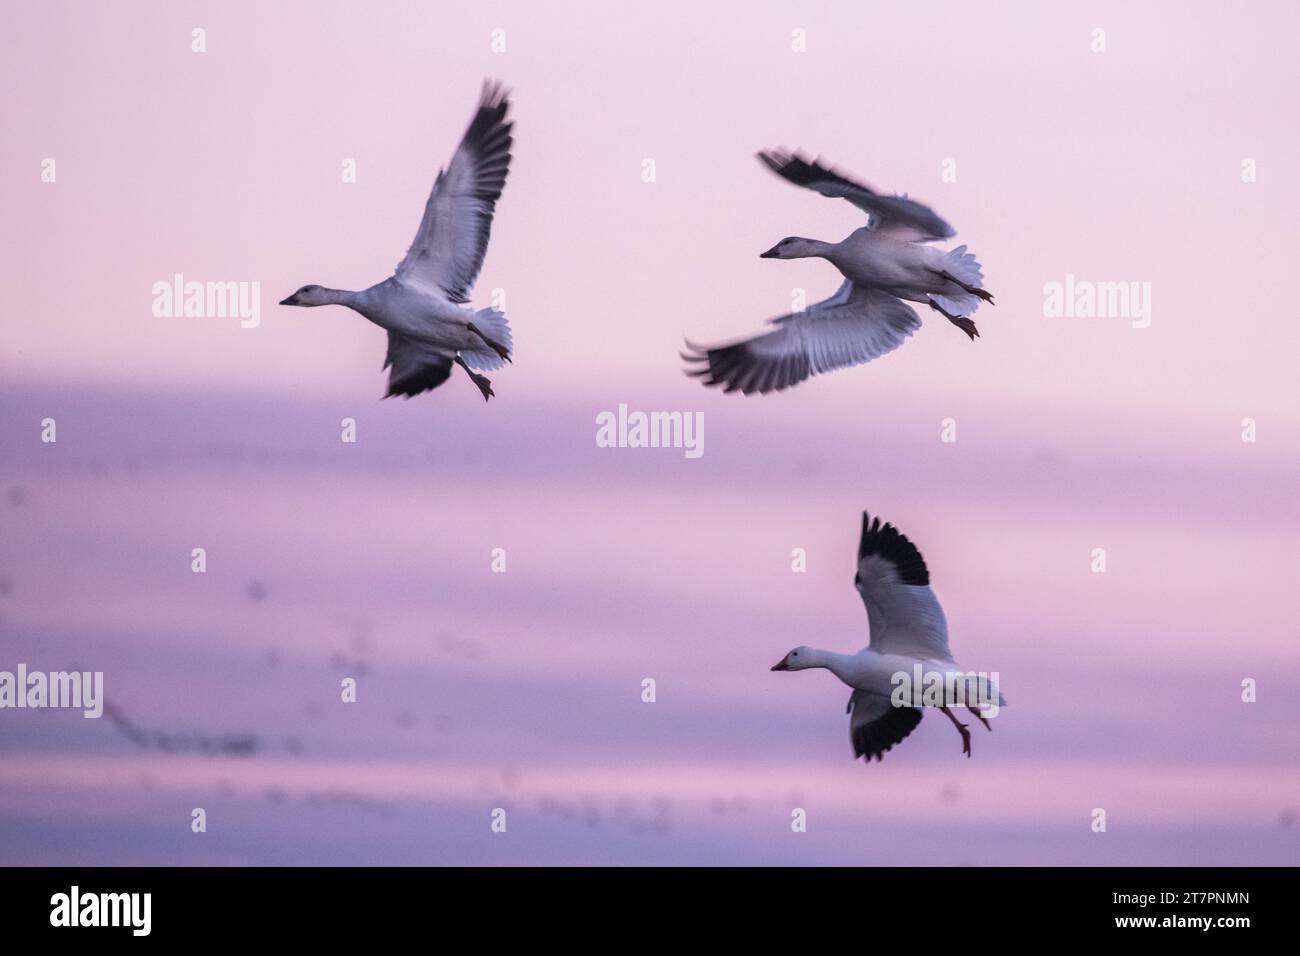 Snow geese (Anser caerulescens), this goose species visits Sacramento Wildlife refuge in California in huge numbers during their winter migration. Stock Photo